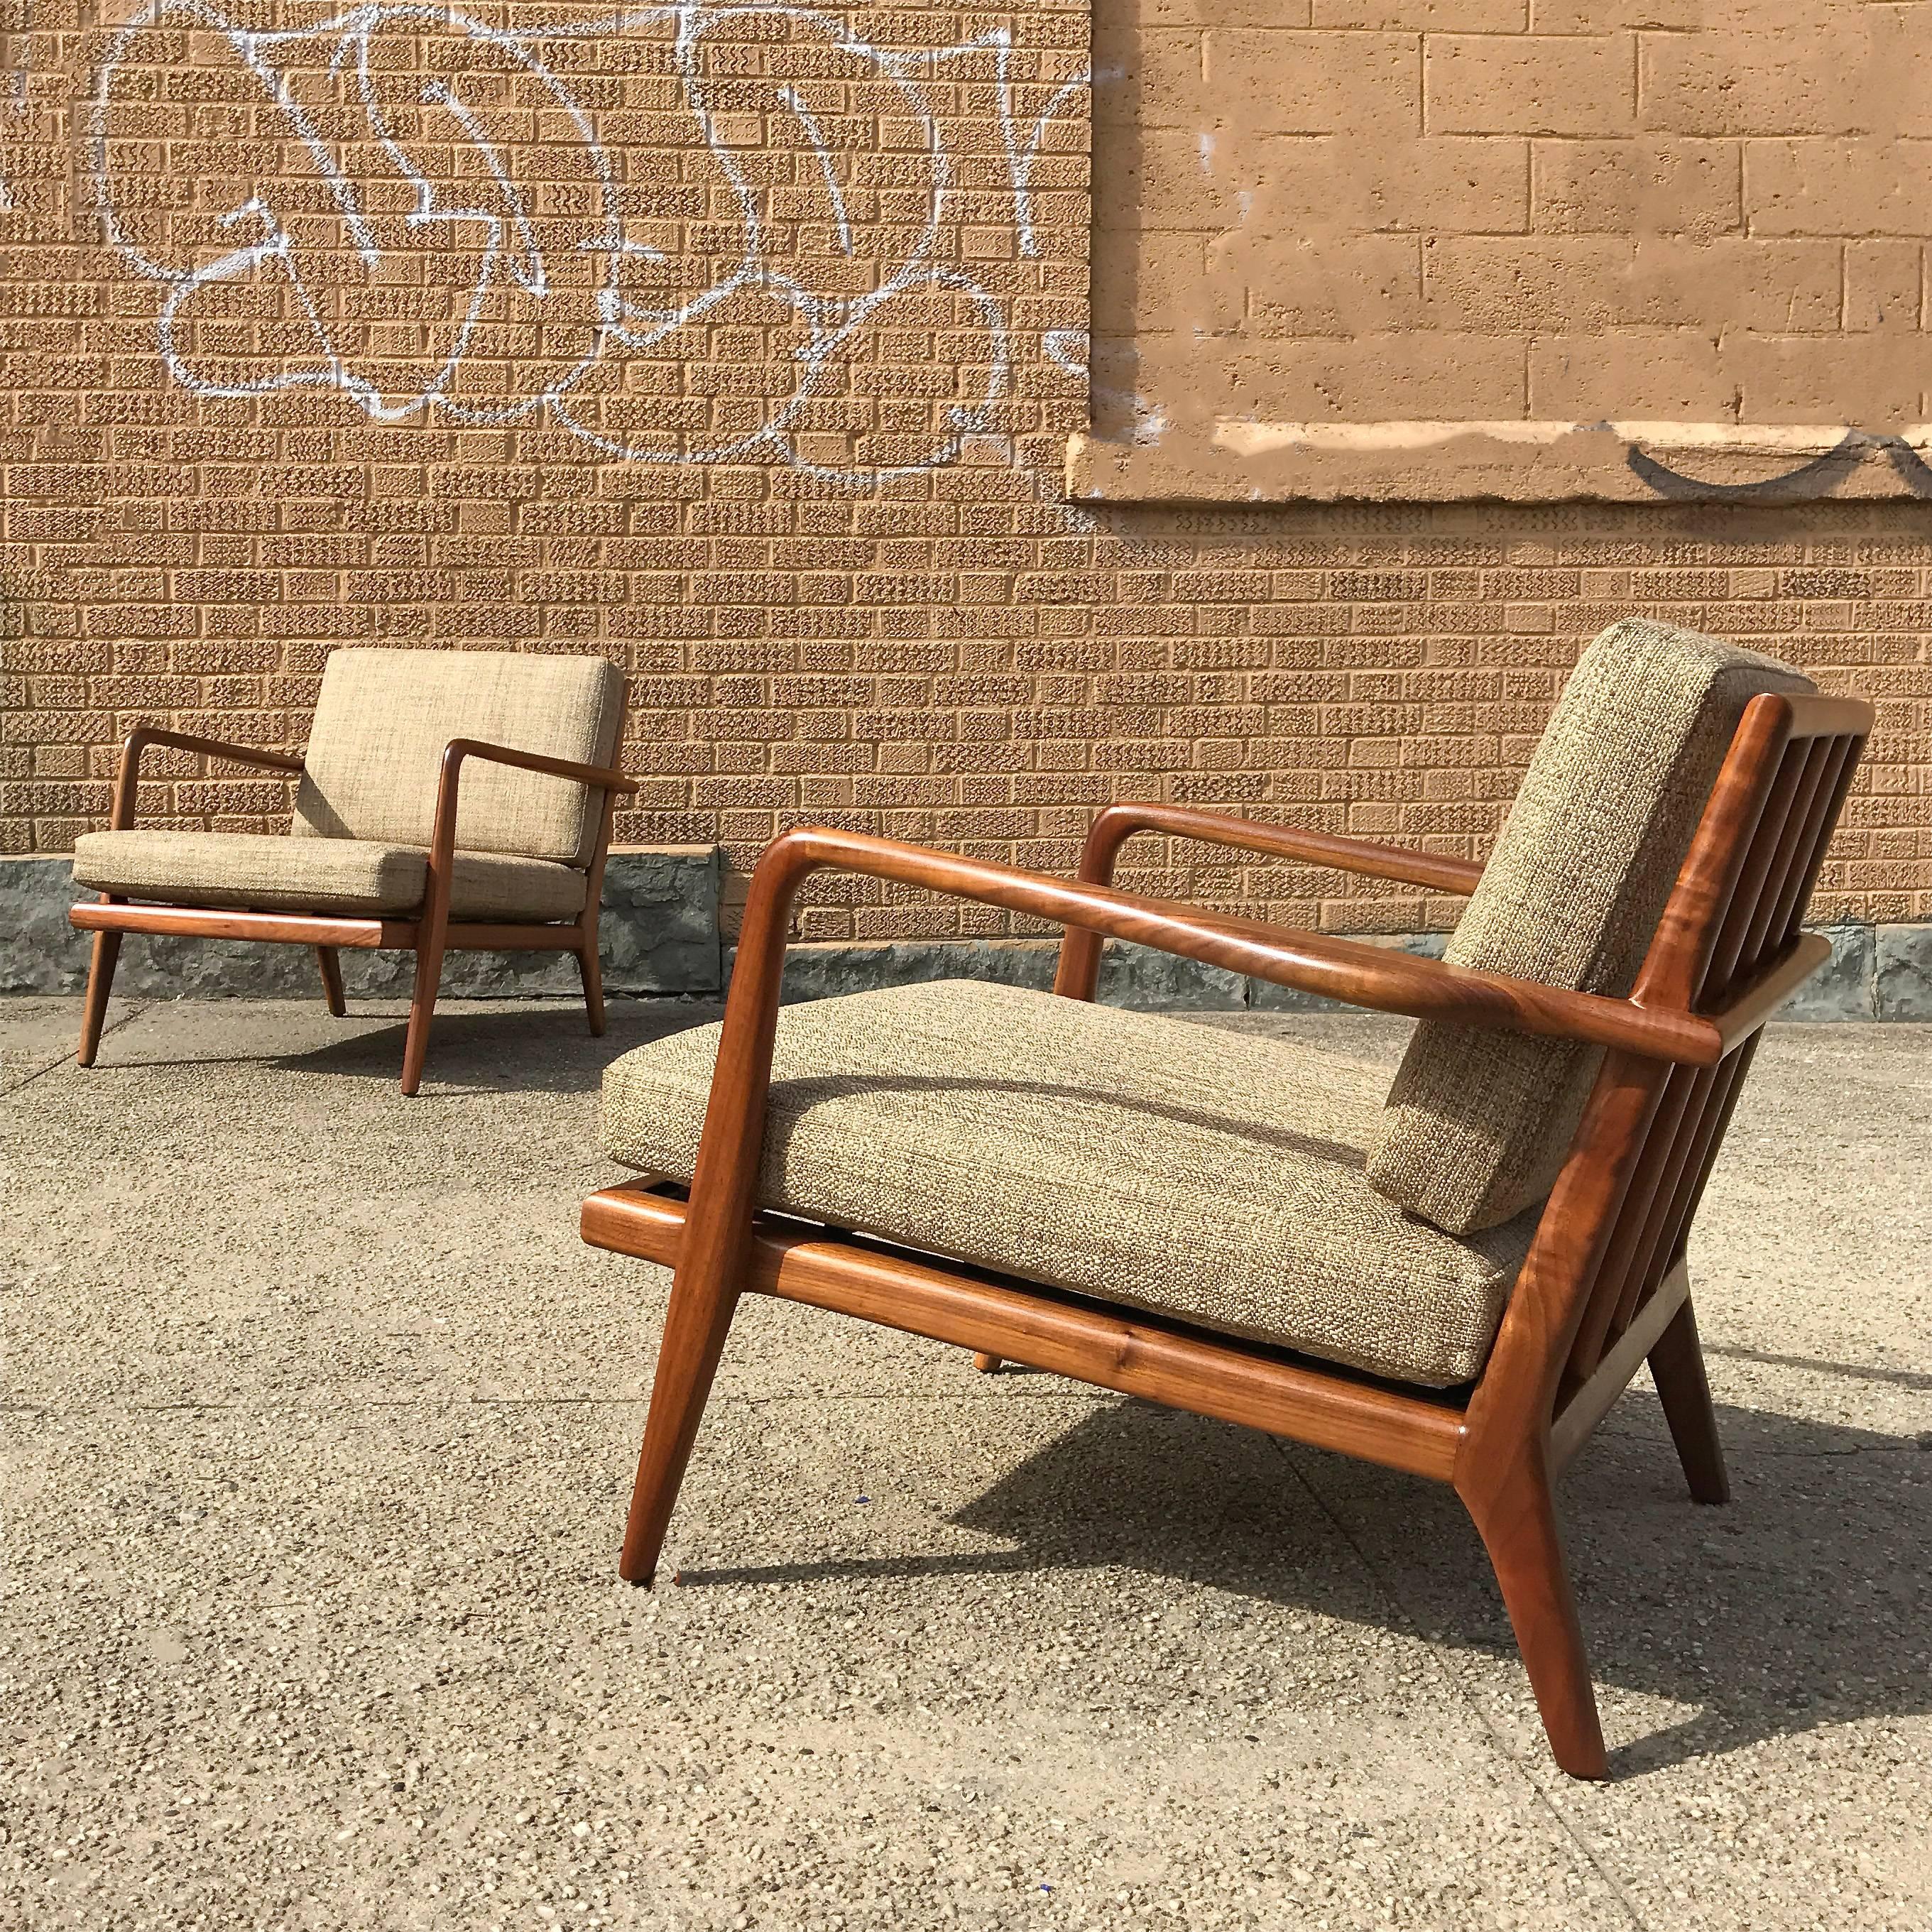 Pair of fantastic, Mid-Century Modern, lounge chairs by Mel Smilow feature solid walnut frames with rail backs and cushions newly upholstered in beige linen blend.